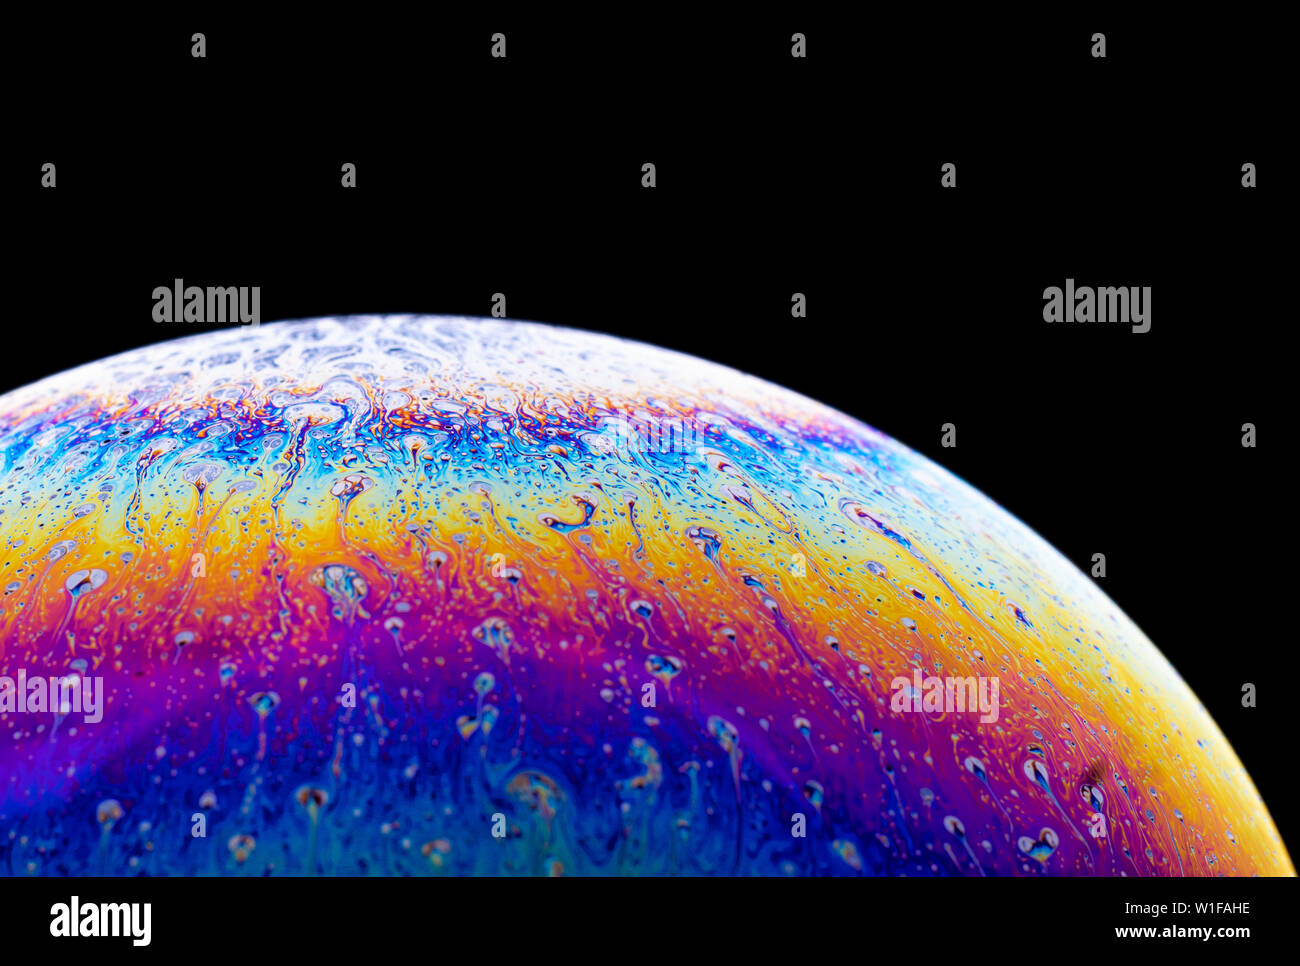 Incredible fancy soapy water pattern abstract background semicircle. Model of Space or planets universe cosmic. Stock Photo